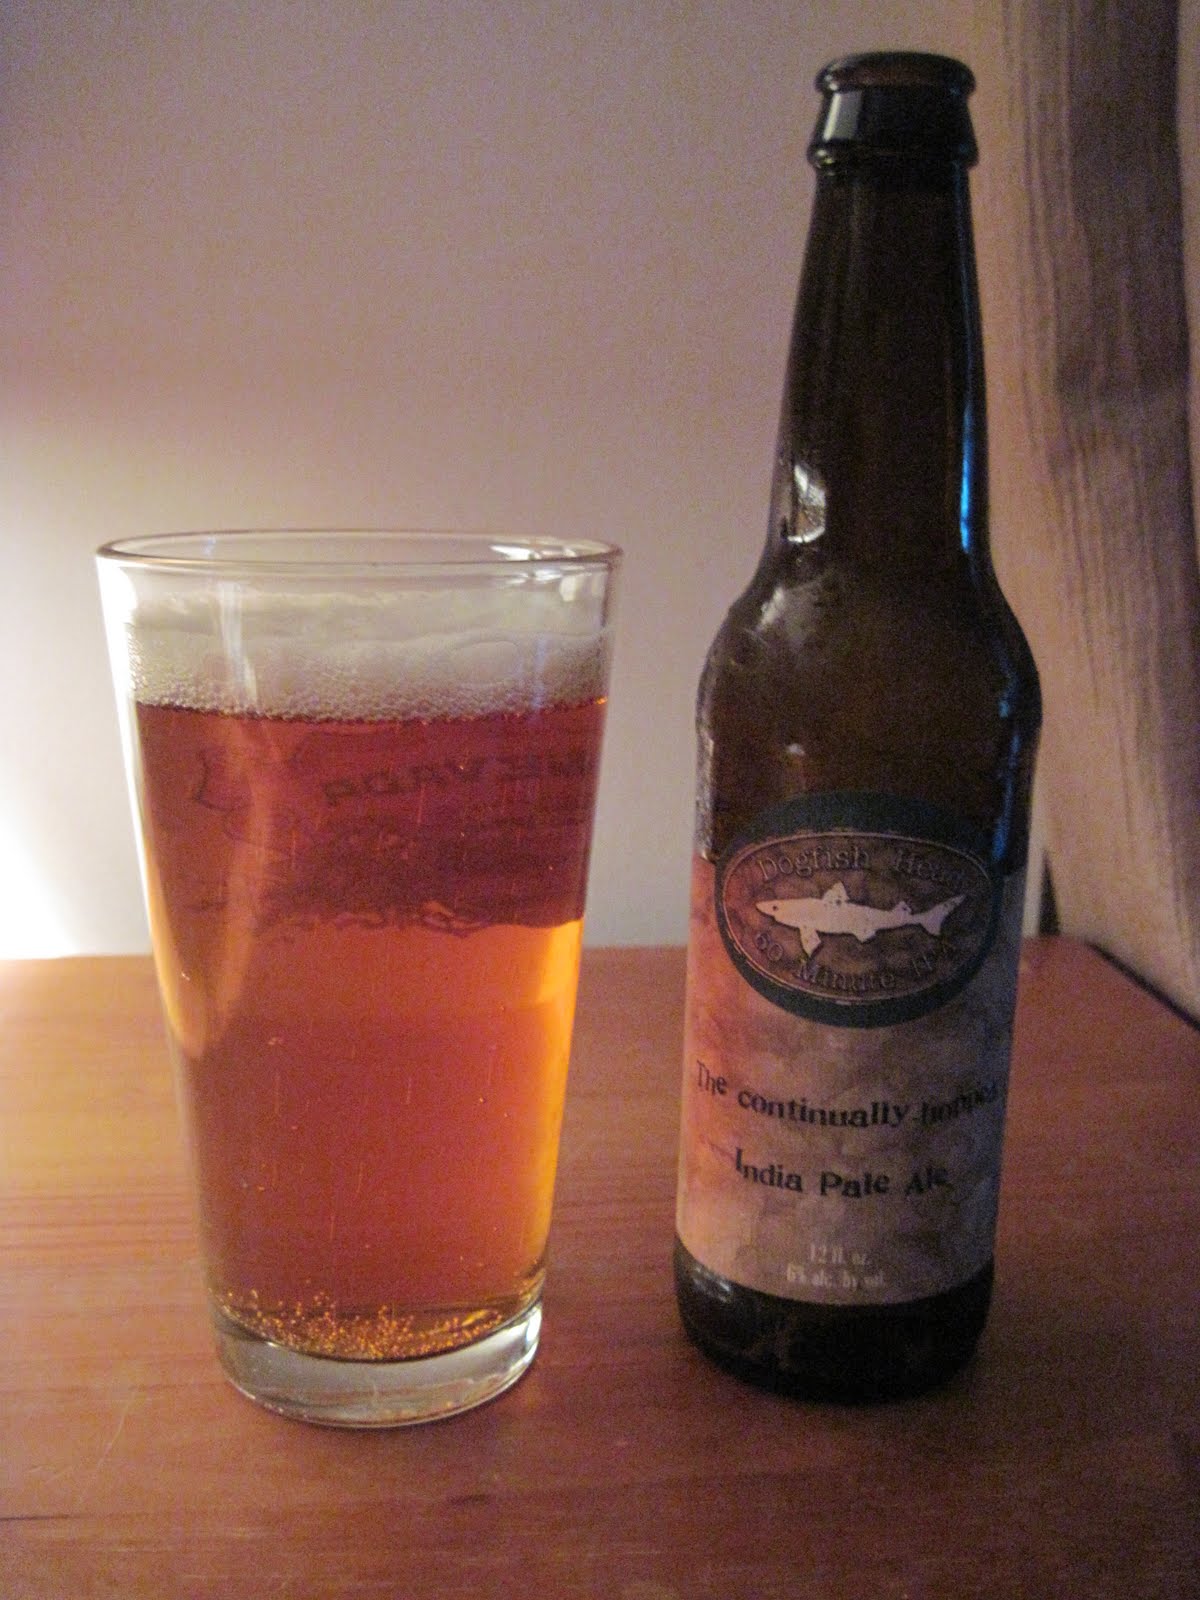 Dogfish+head+ipa+review